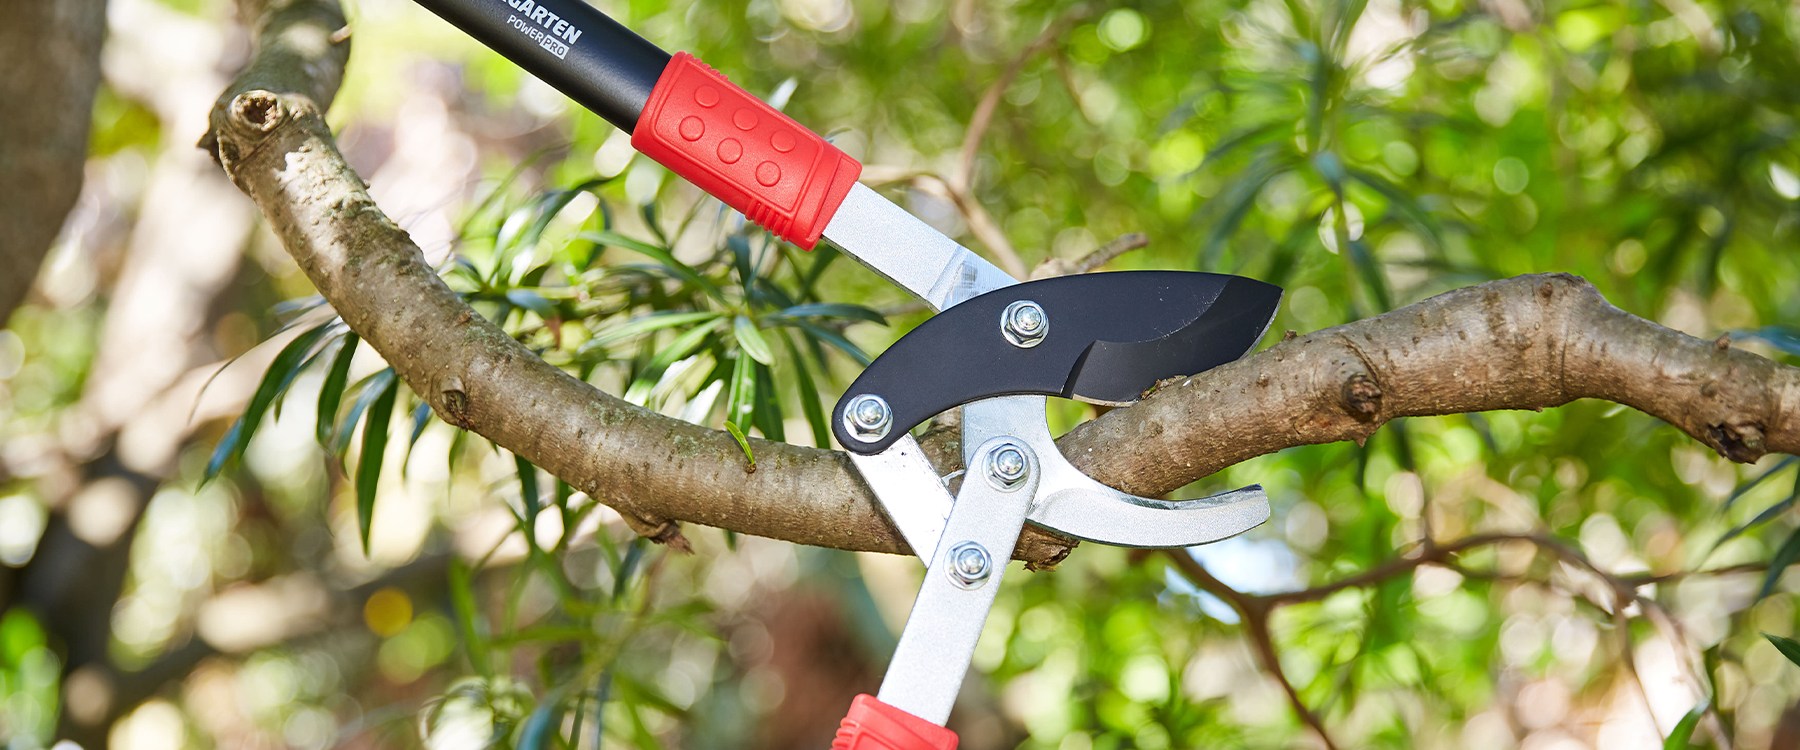 Proper Pruning: When, How, and Which Tools to Use